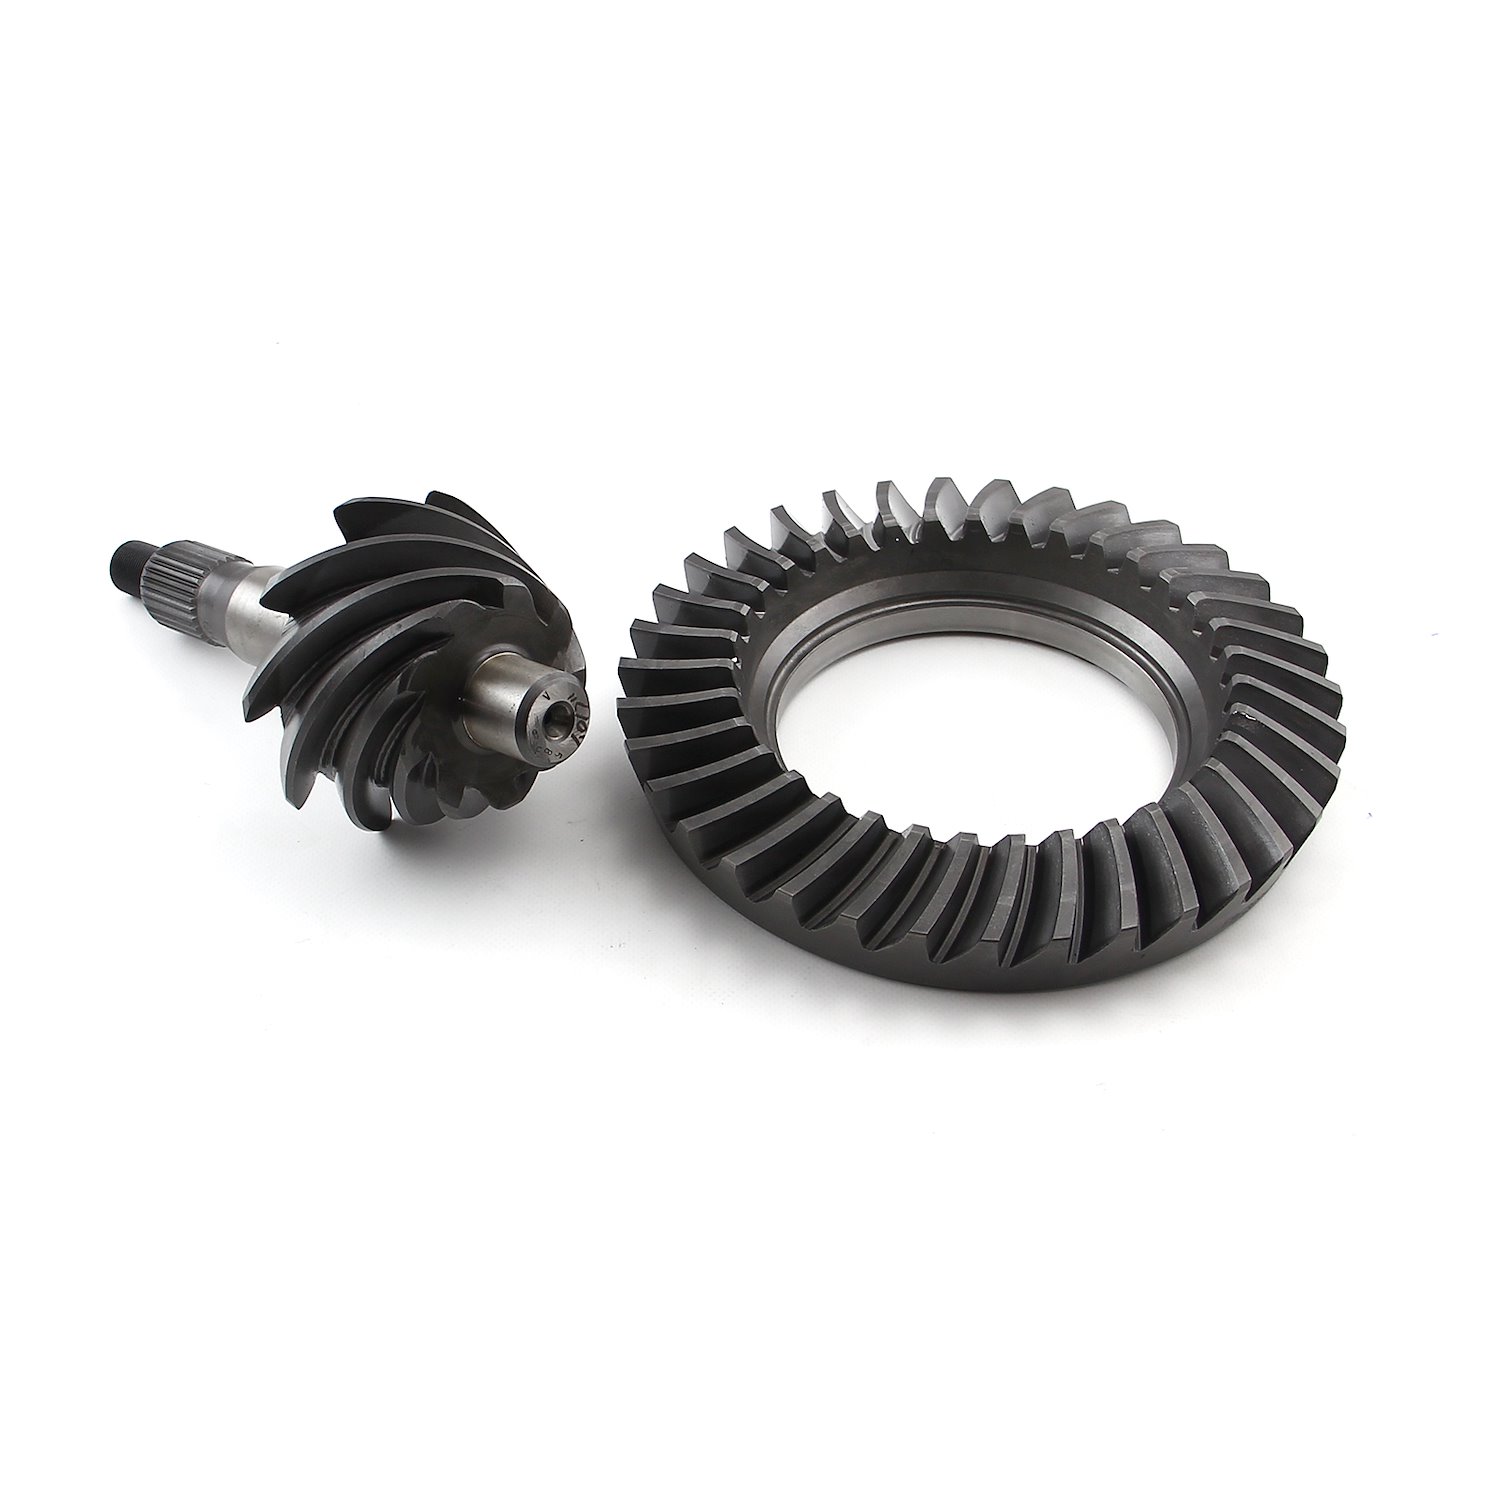 4.11 28 Spline Ford 9 Ring and Pinion Set 8620